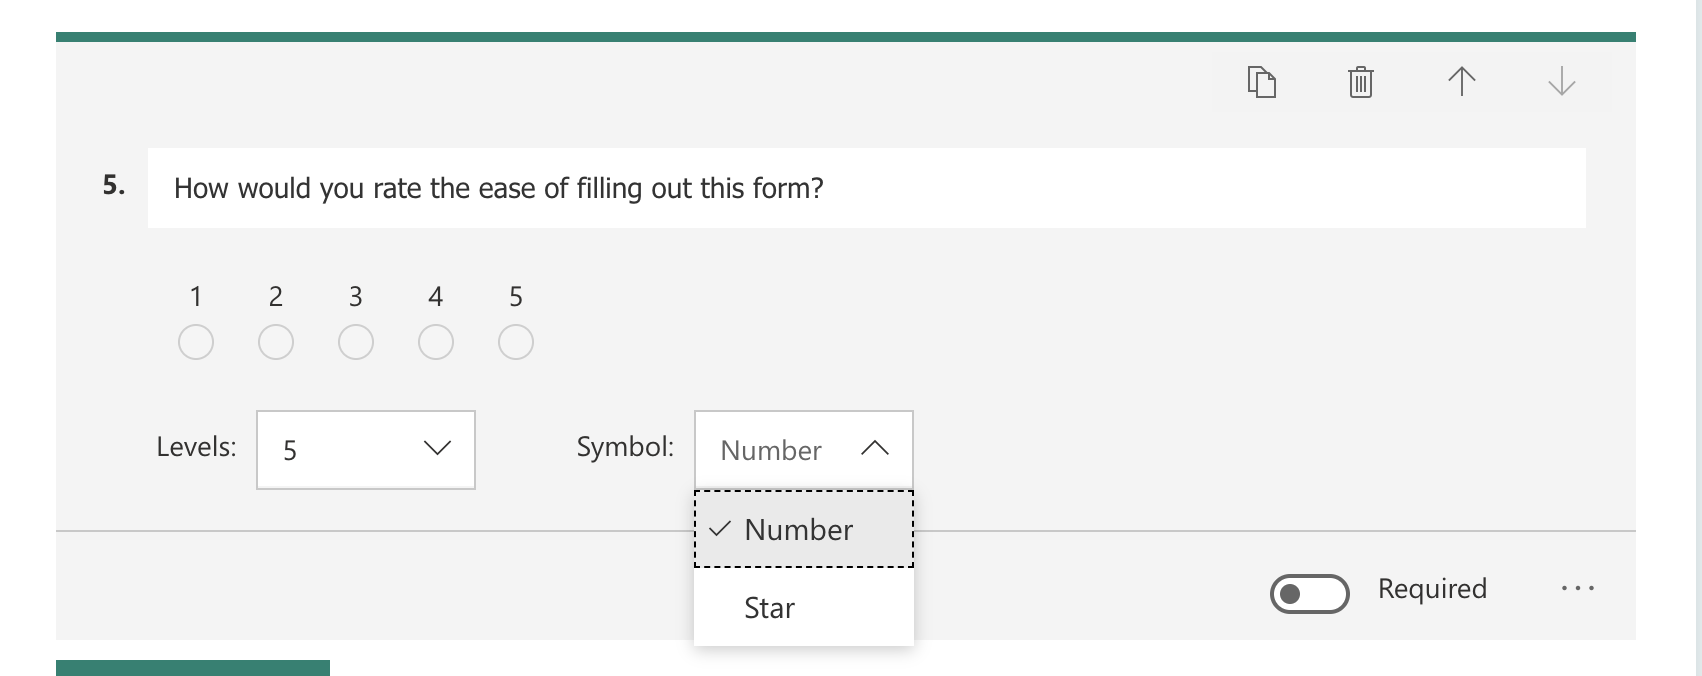 Screenshot showing a Rating question that asks "How would you rate the ease of filling out this form?". The answer could be a radio button with a number of 1 through 5. This is preferable to using the Star option for a rating.